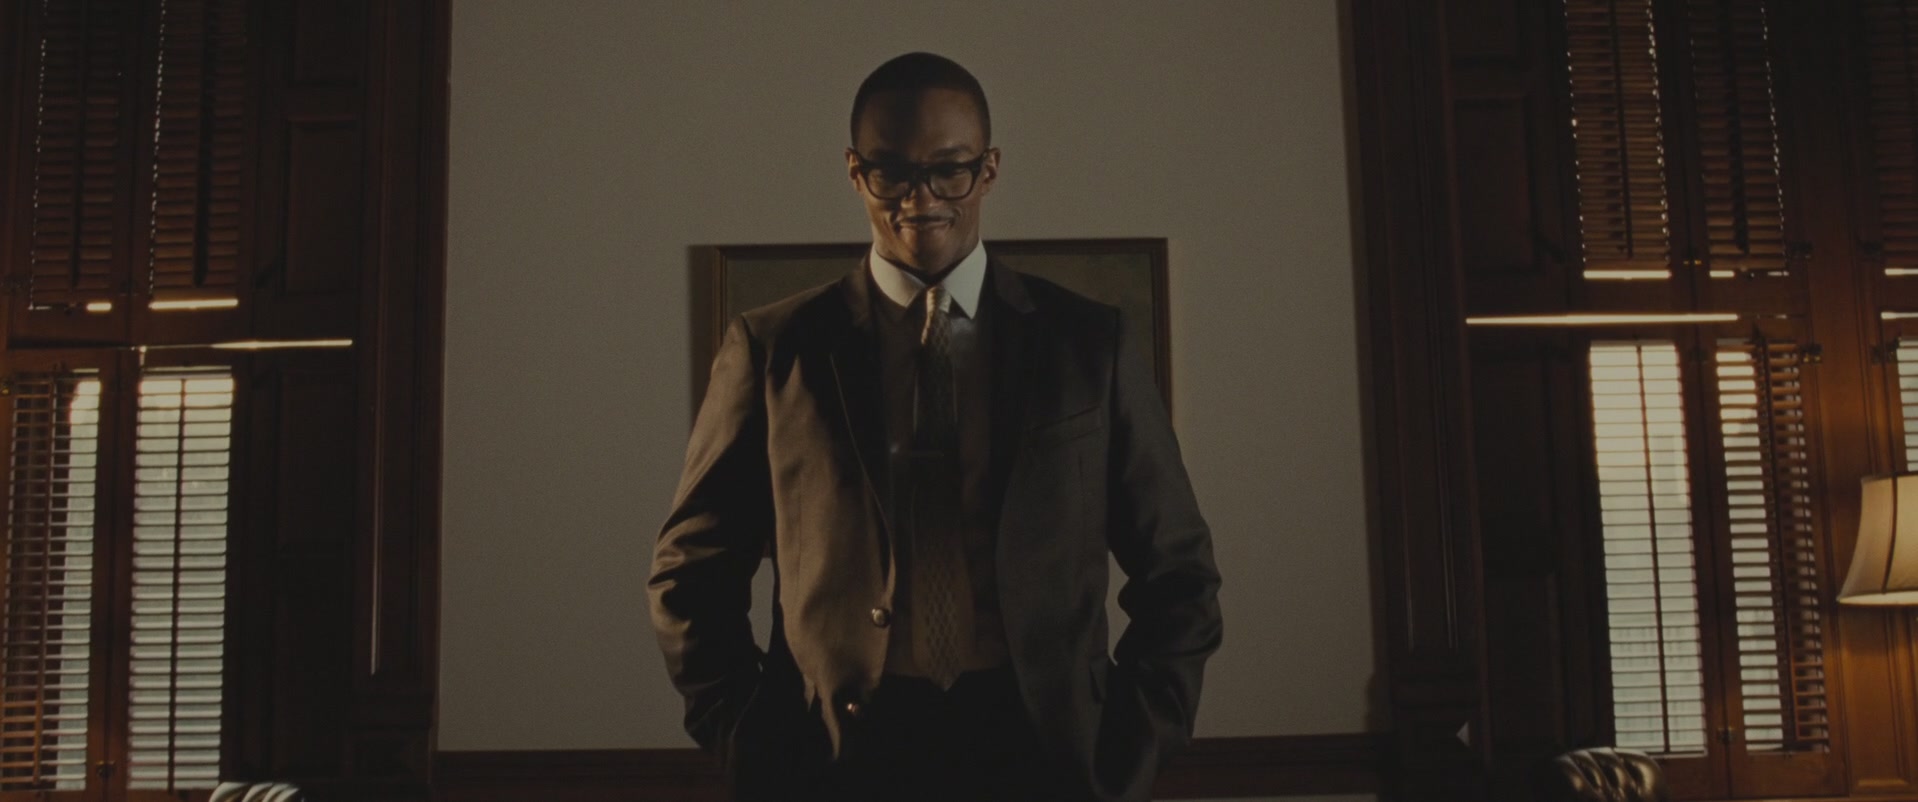 Anthony Mackie Daily Update: The Banker Movie Screencaptures #AnthonyMackie #TheBanker